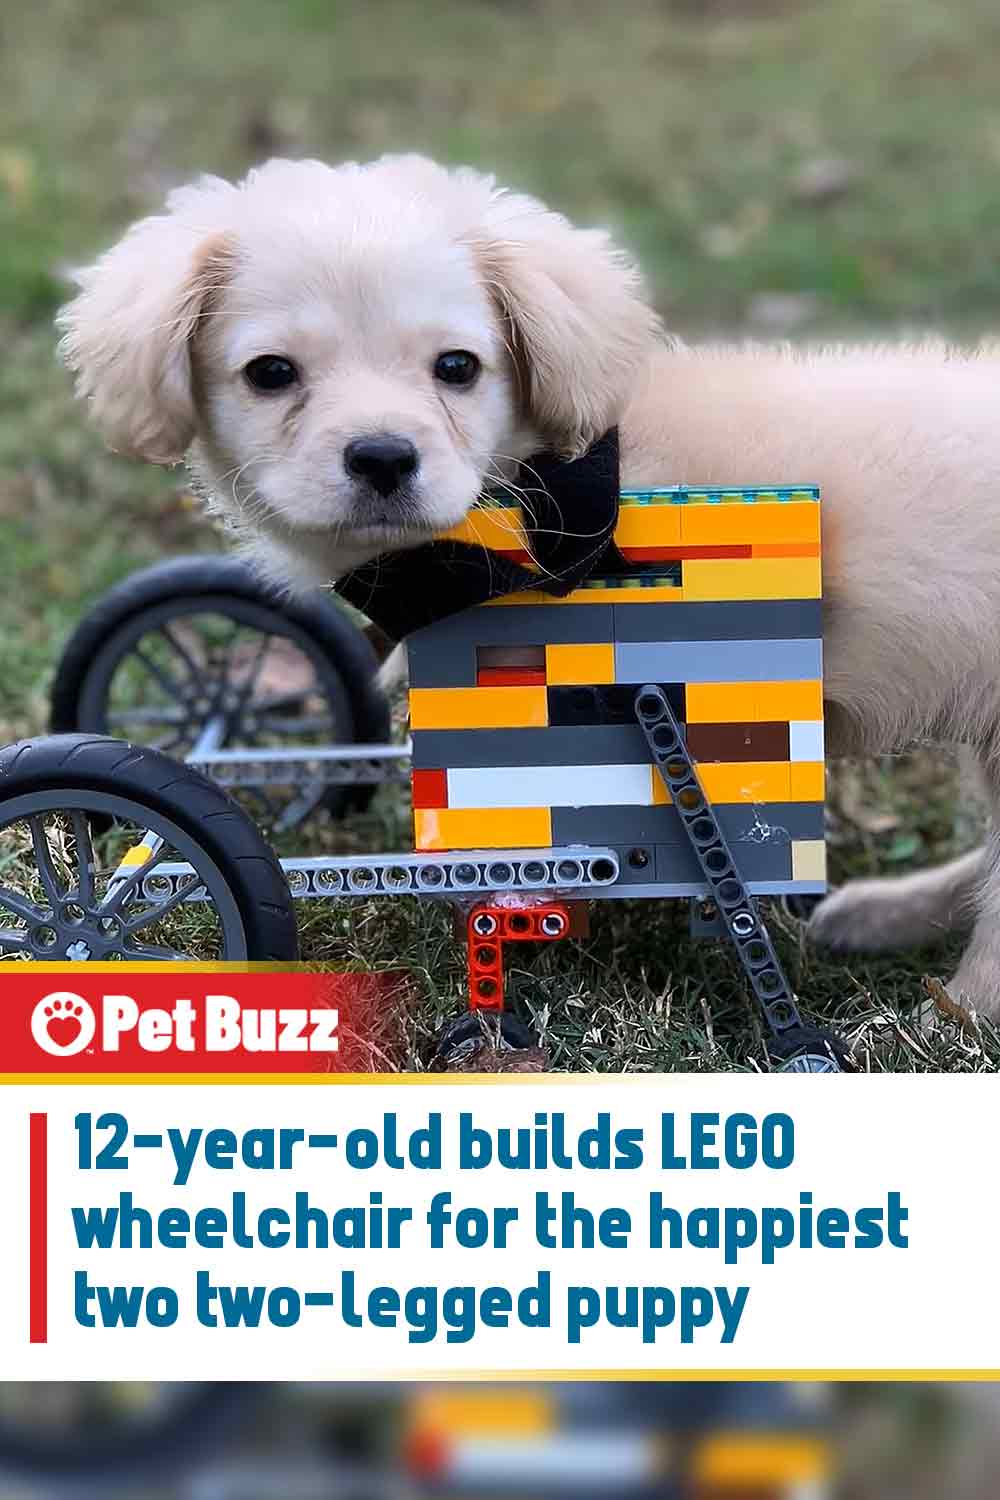 12-year-old builds LEGO wheelchair for the happiest two two-legged puppy